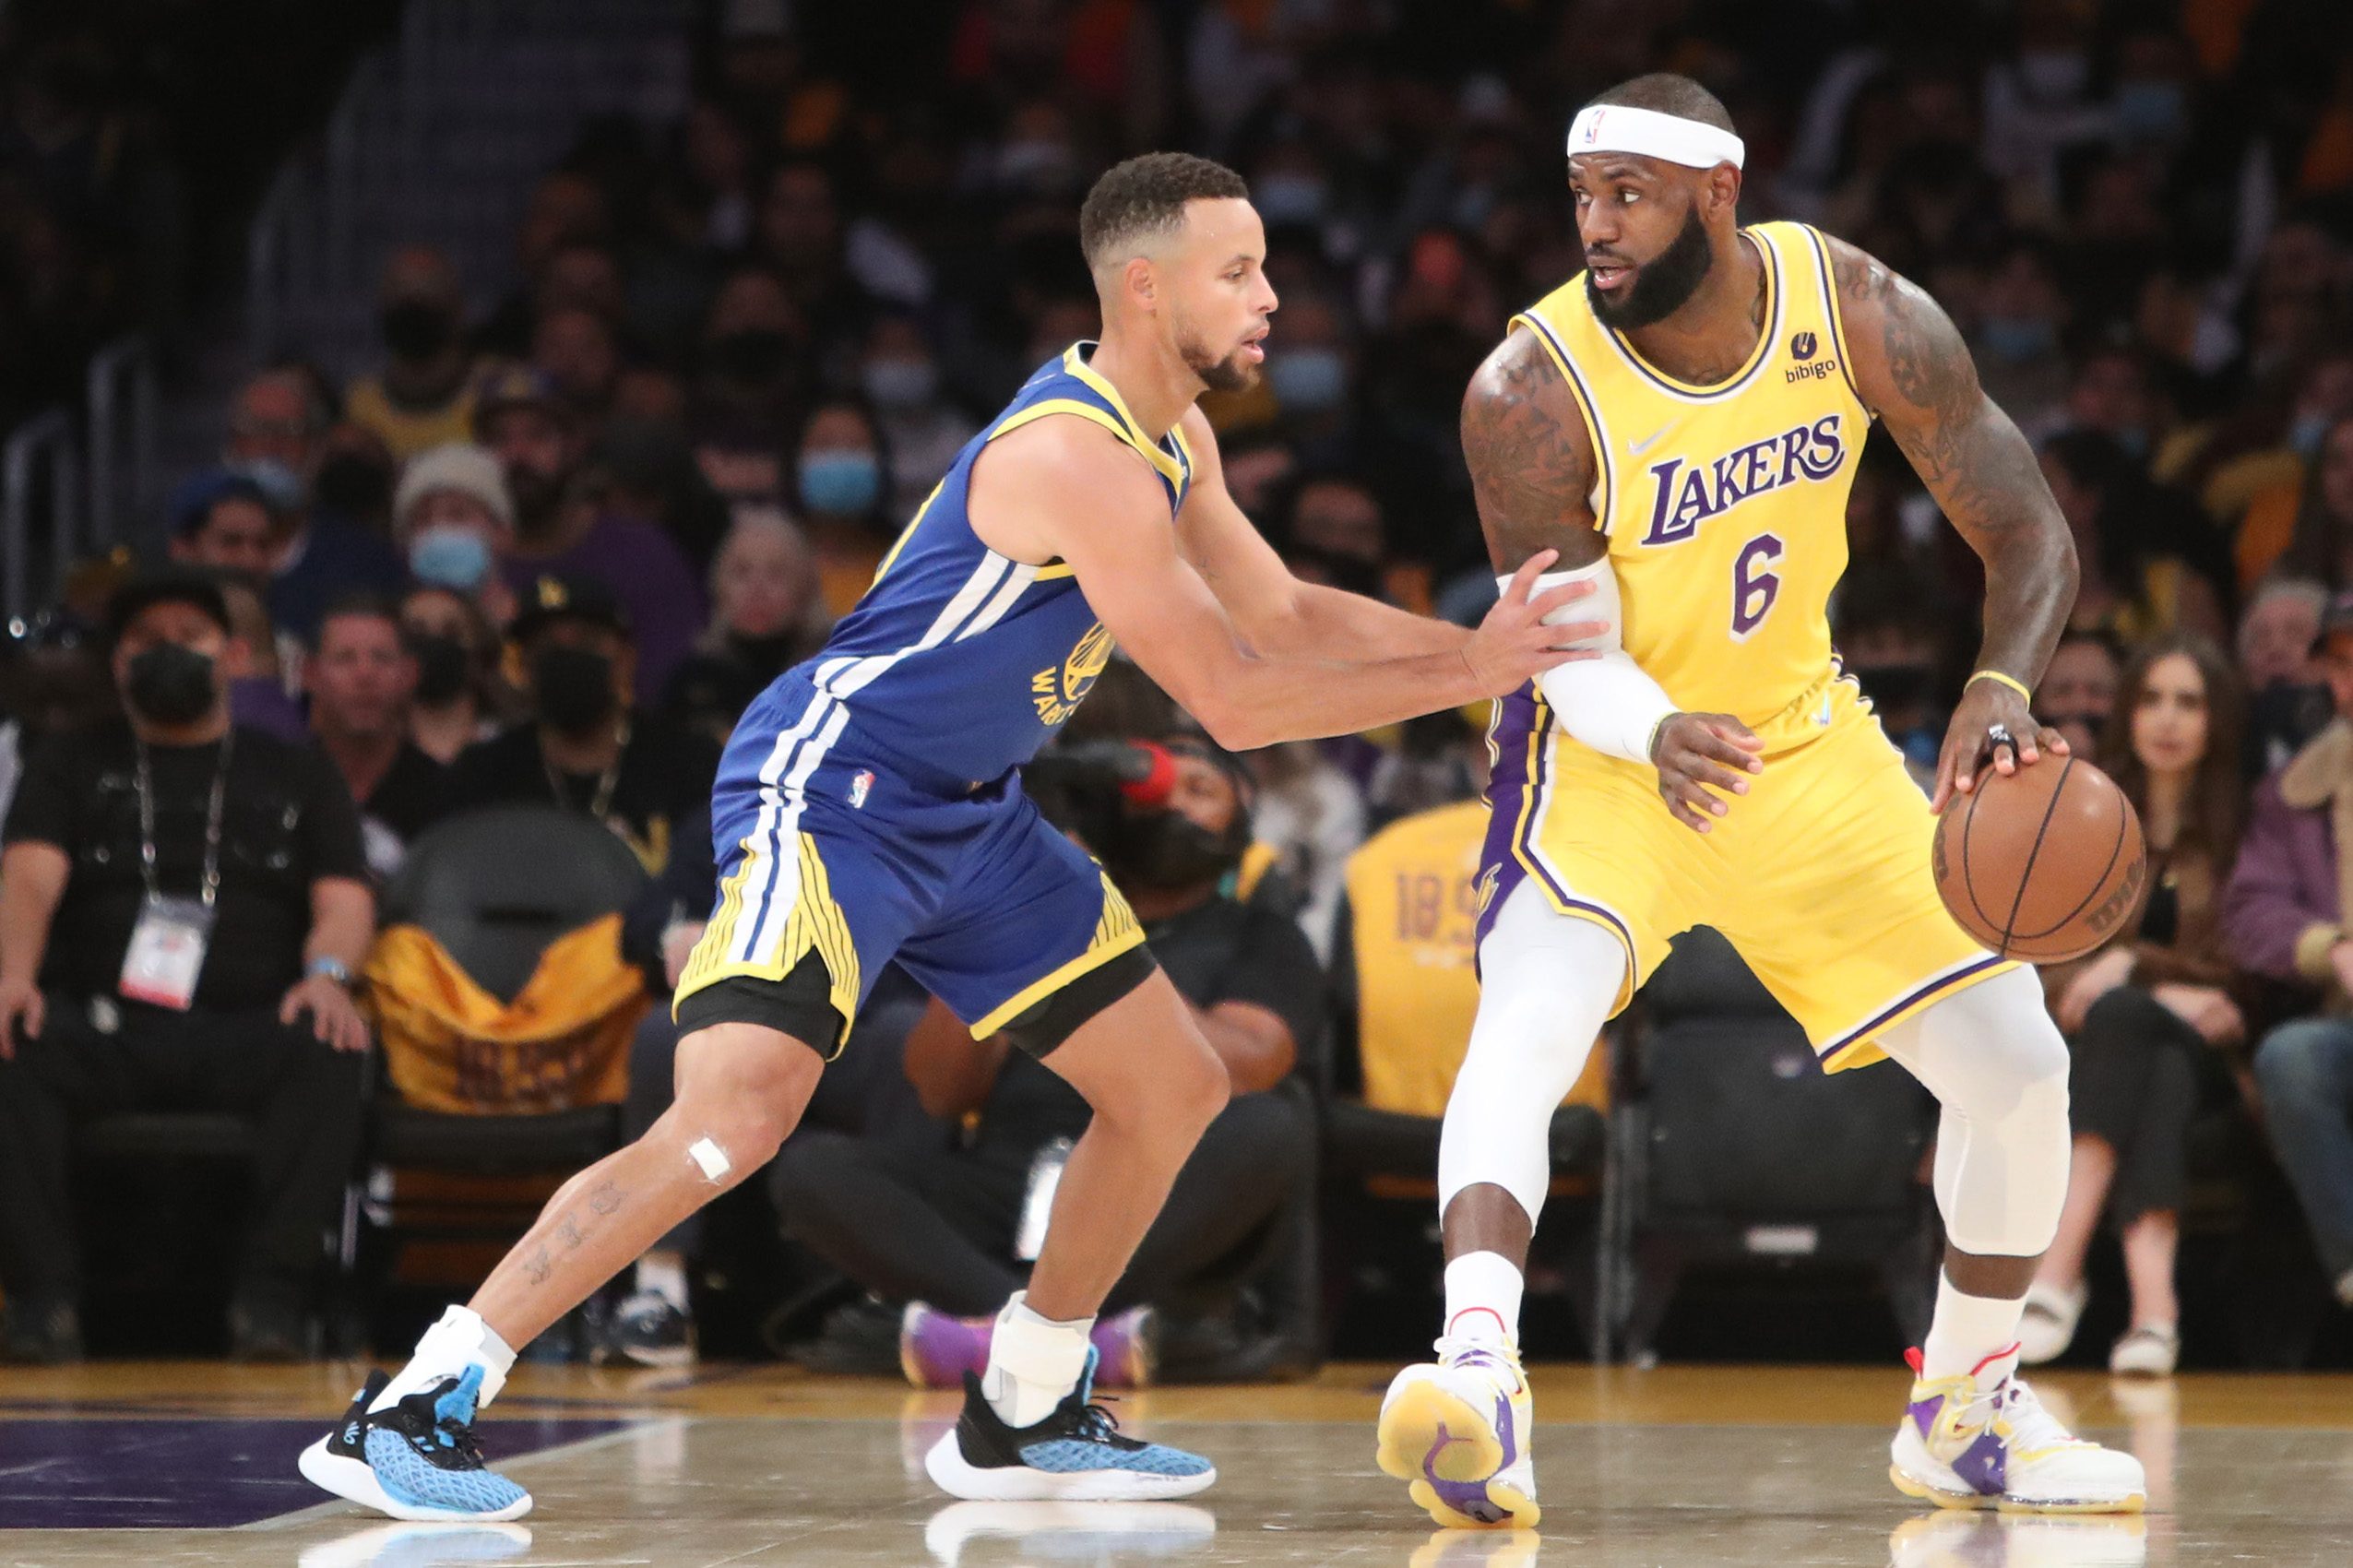 Steph Curry’s triple-double propels Warriors past Lakers